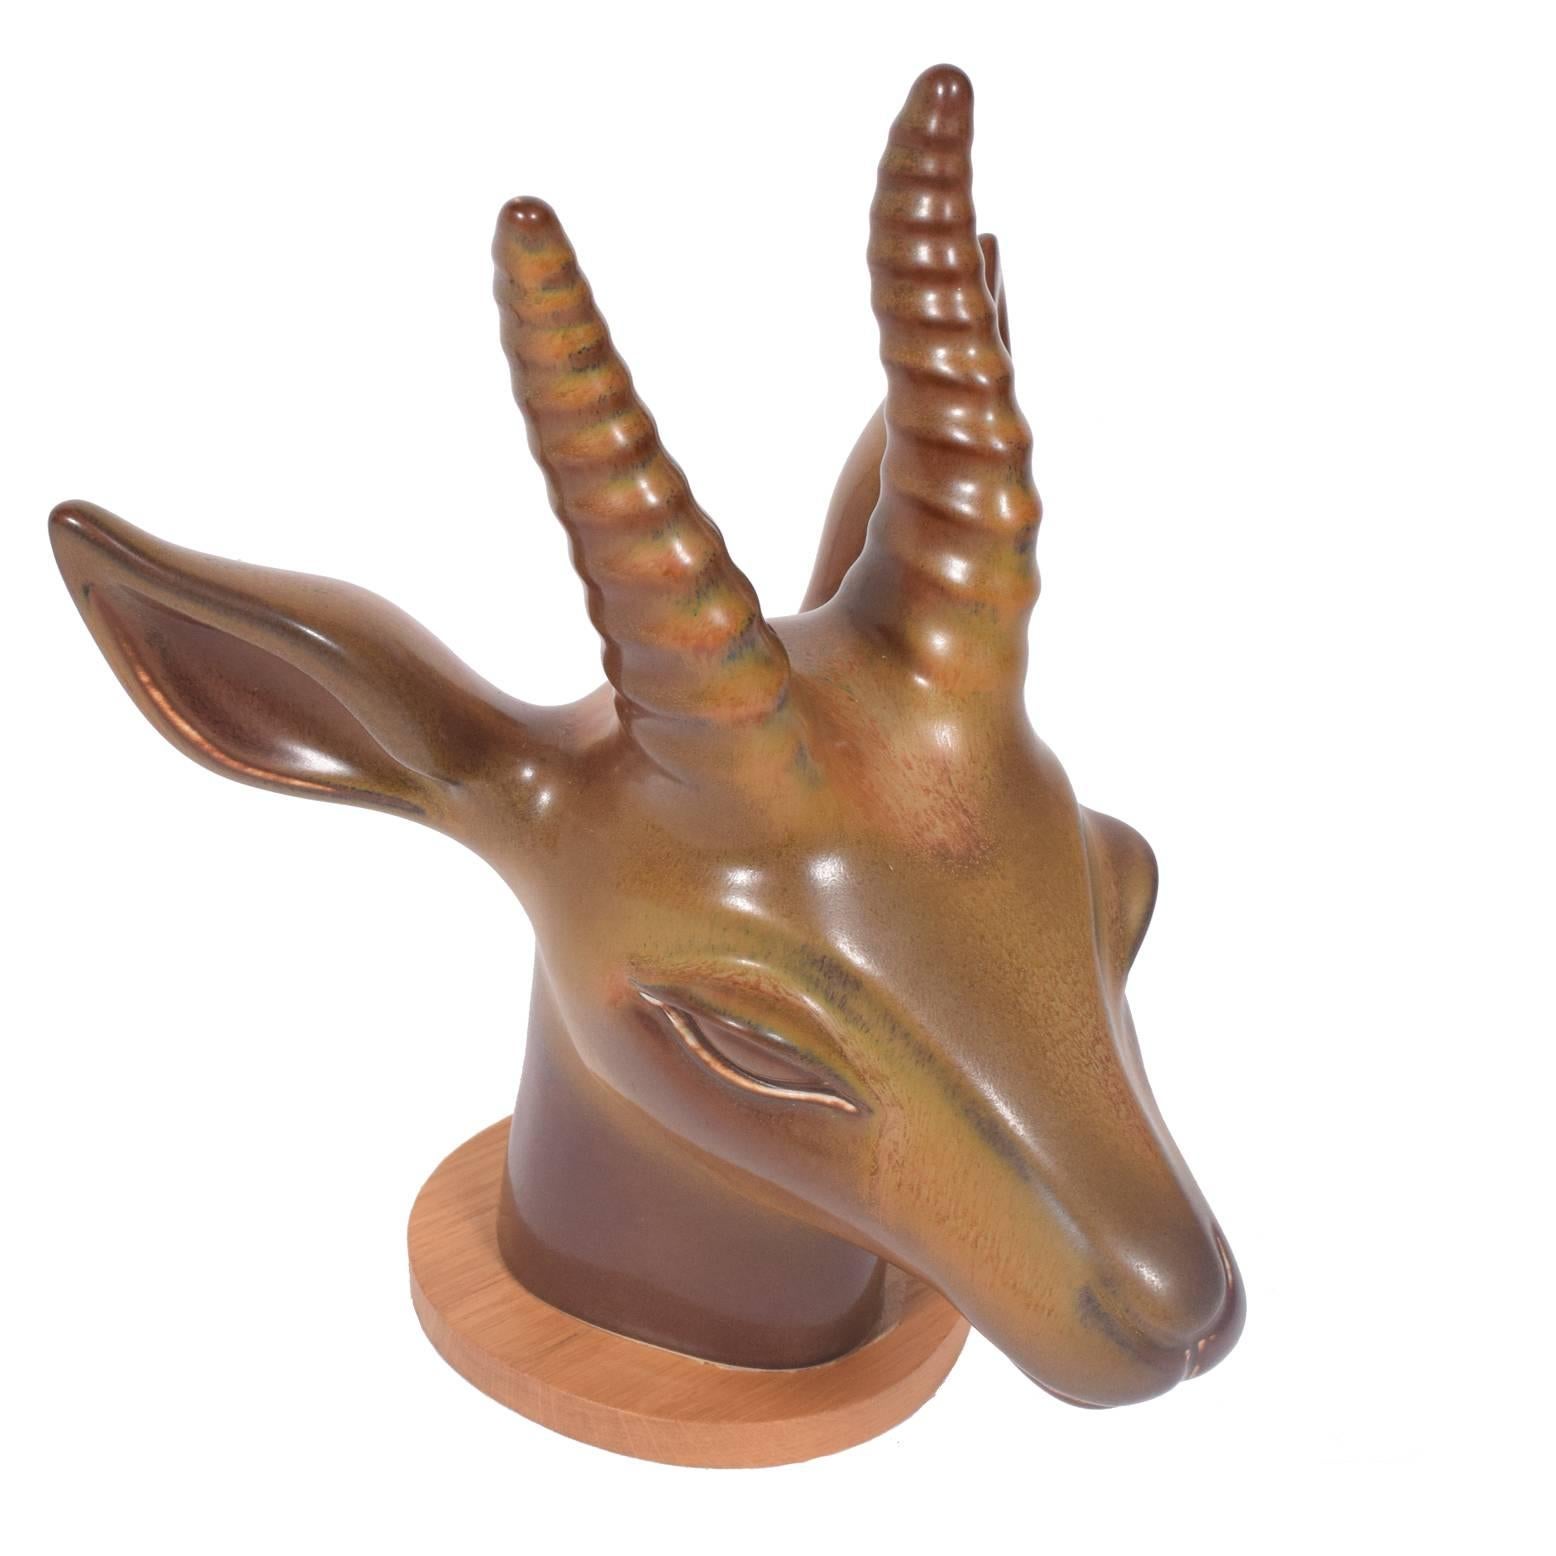 Beautifully glazed stoneware figure of an antelope head designed by Gunnar Nylund for Rörstrand.

Measures: Height with base 13